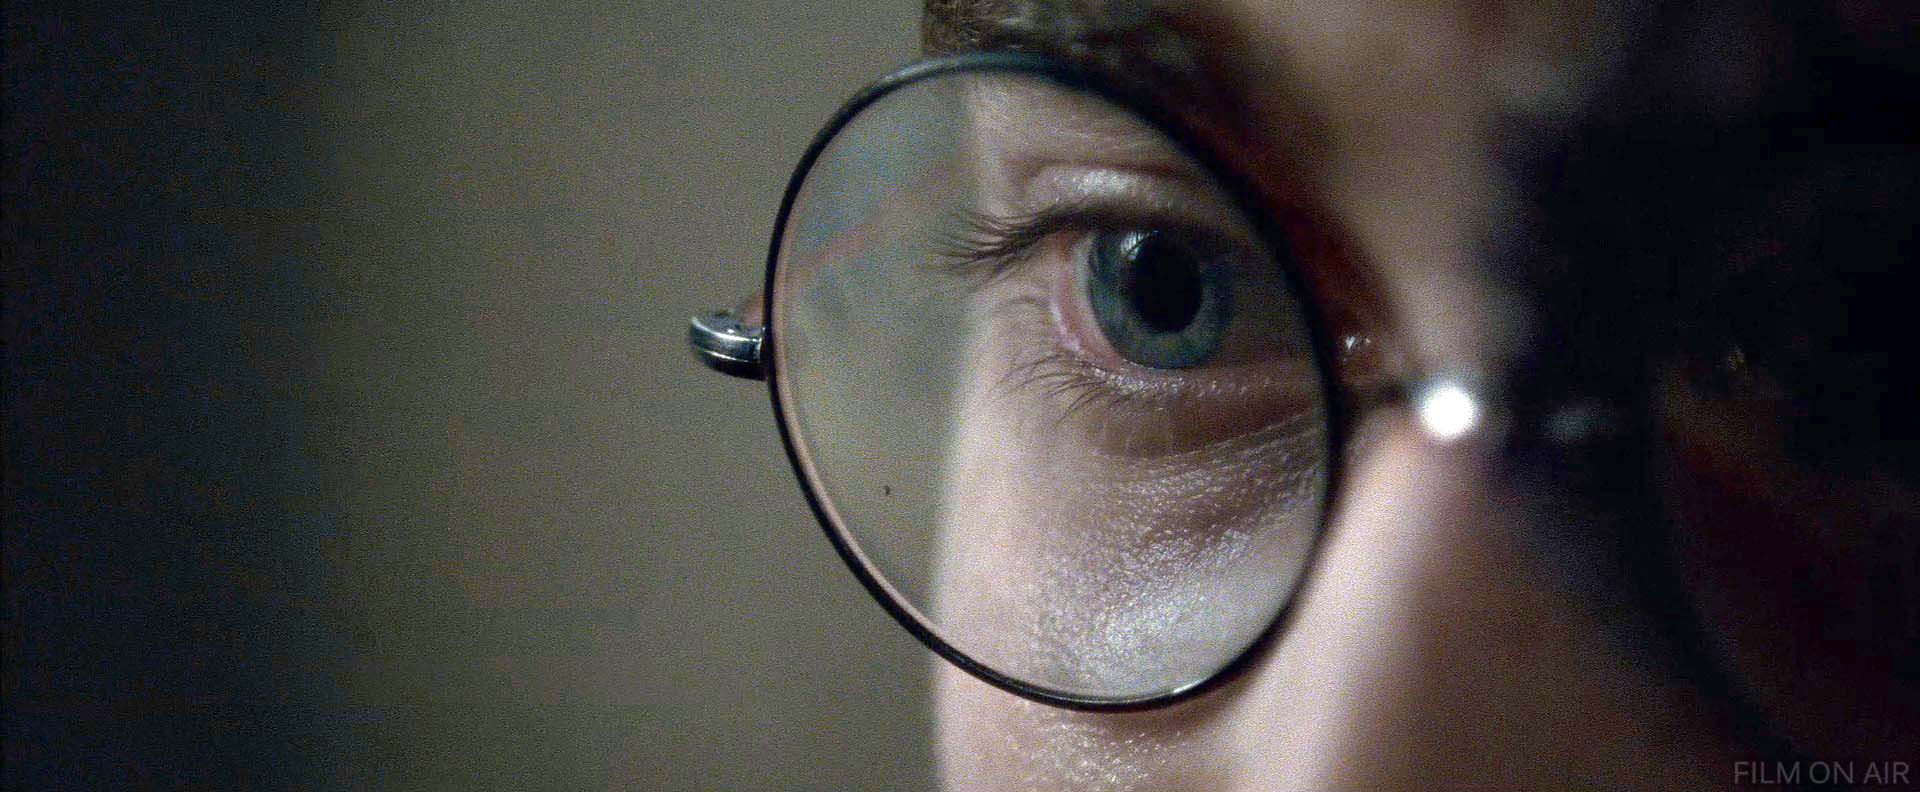 Harry Potter Glasses
 in Harry Potter and the Deathly Hallows Part 2 in Harry Potter and the Deathly Hallows Part 2